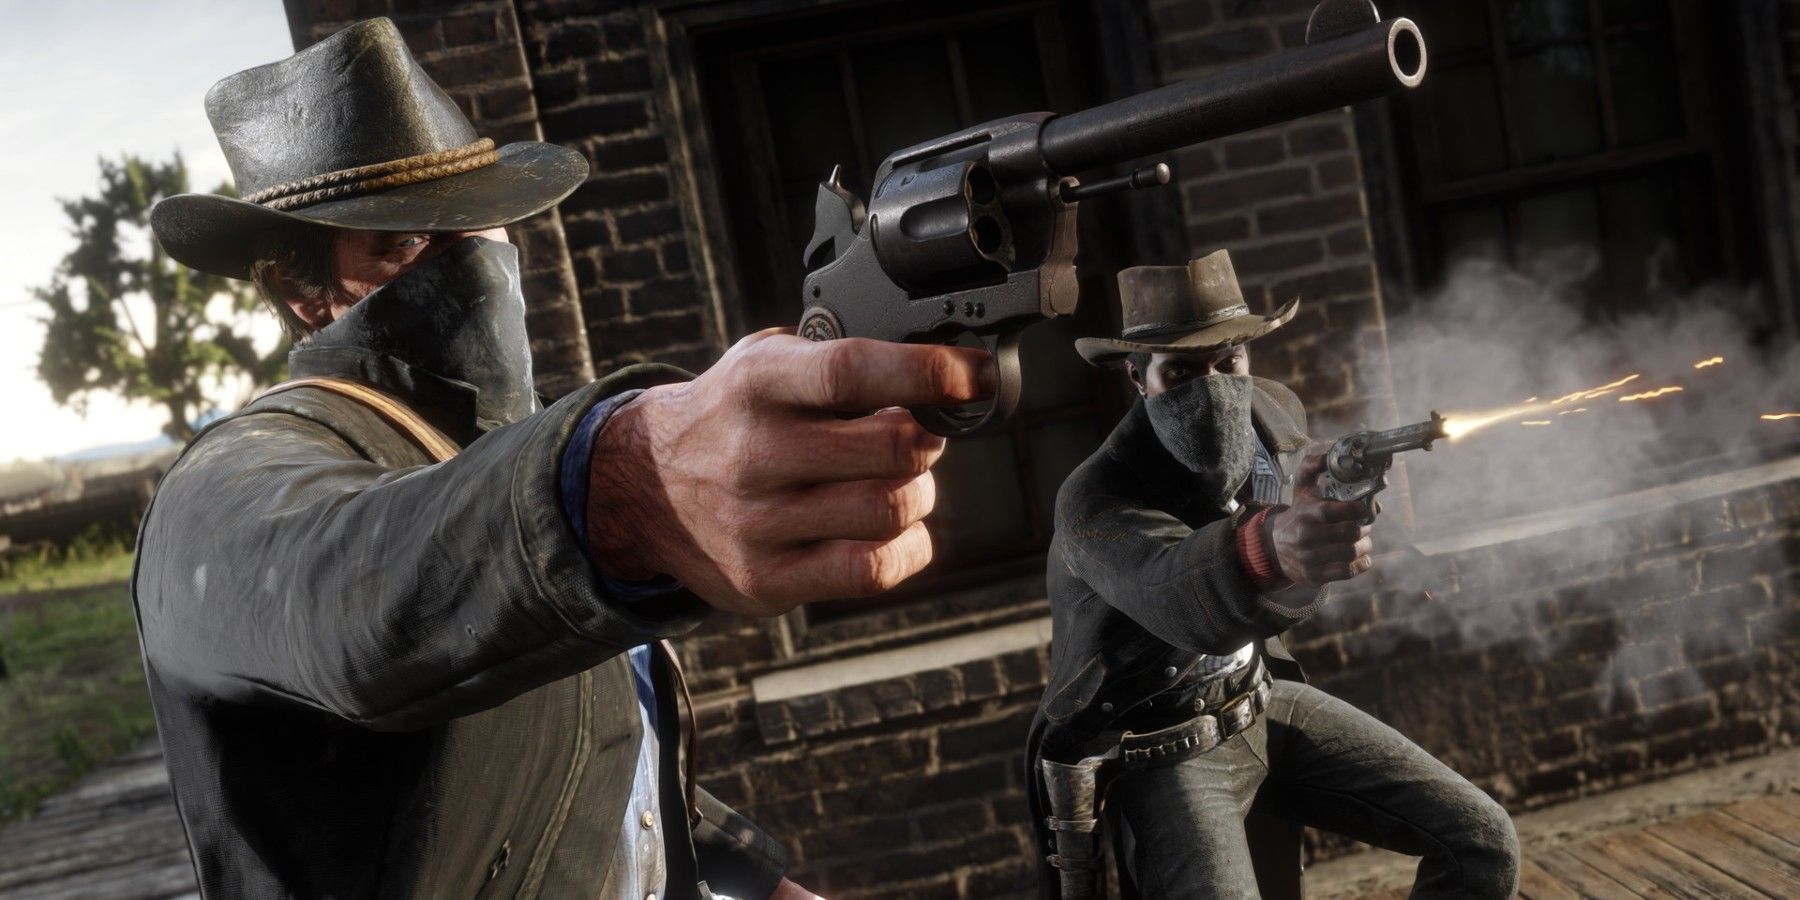 Possible Grand Theft Auto 6 Assets Found In Red Dead Redemption 2 Datamine